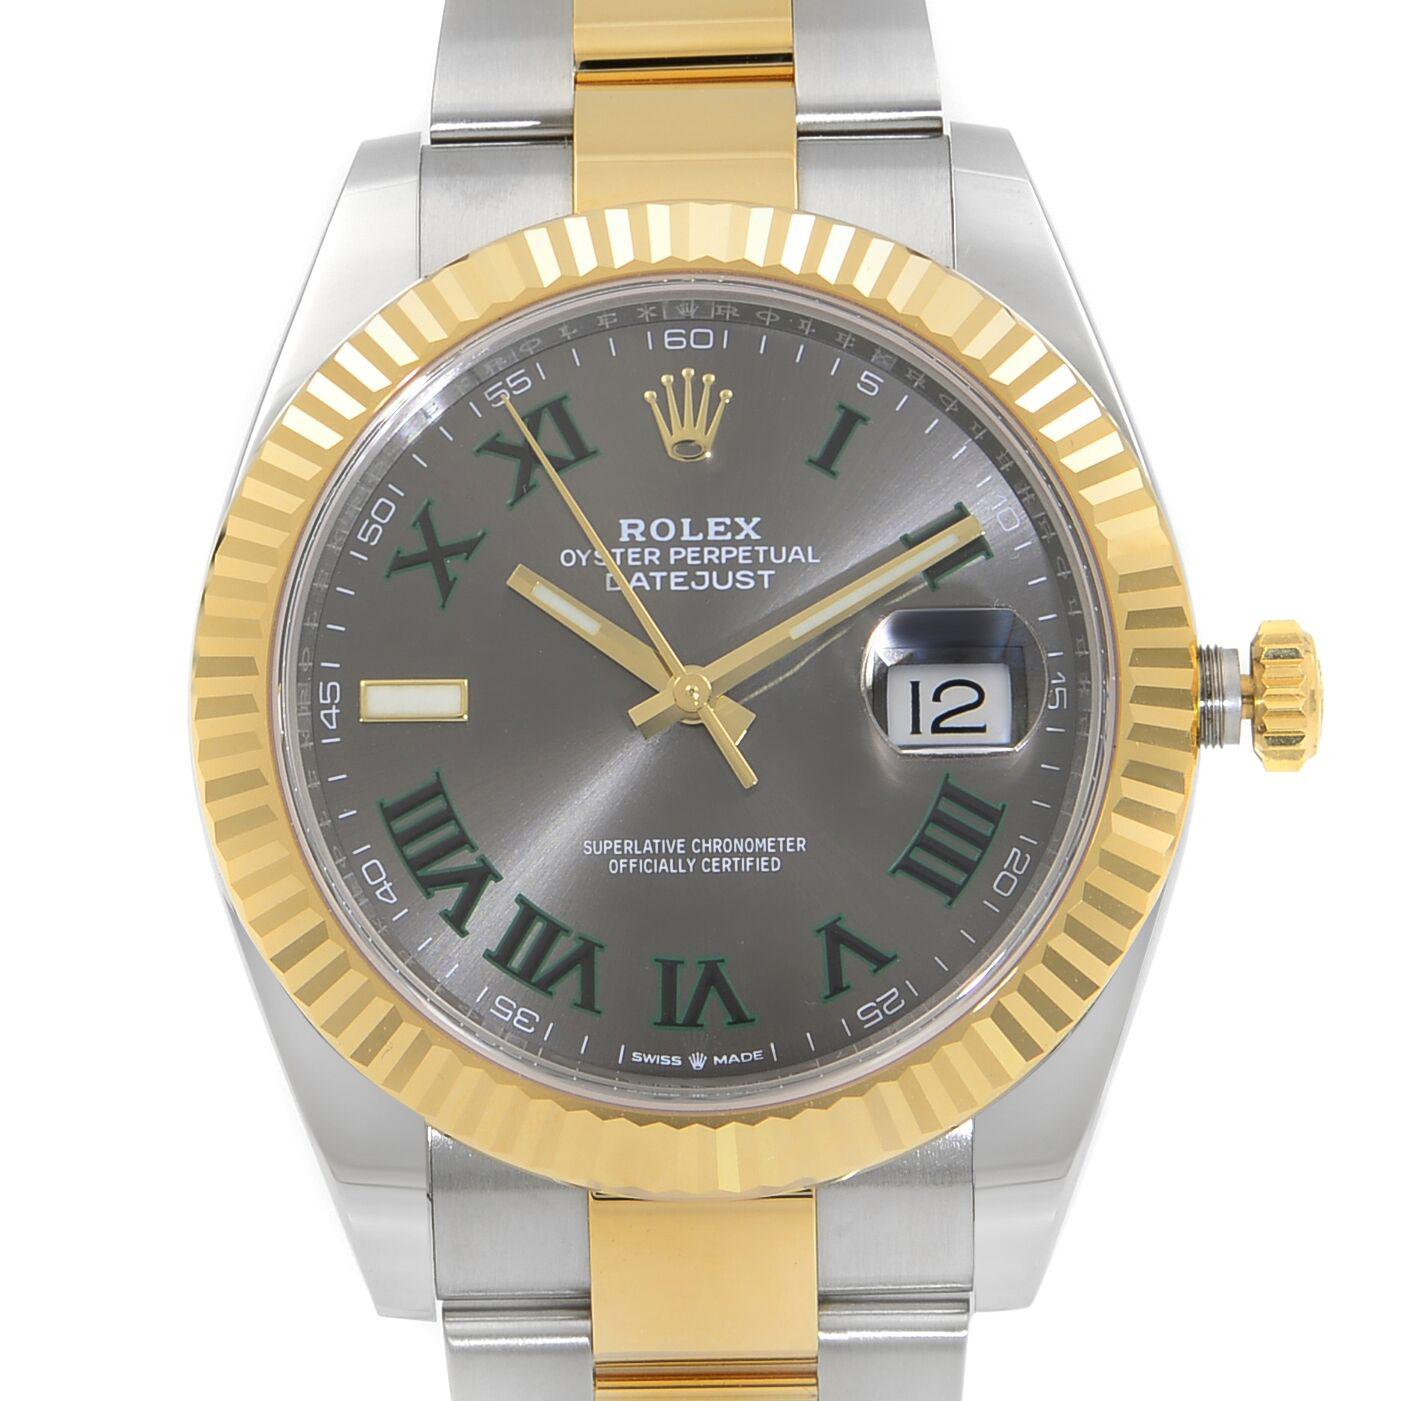 Unworn. Original Box and Papers are Included. 

General Information

Brand: Rolex
Department: Men
Model Number: 126333
Country/Region of Manufacture: Switzerland
Model: Rolex Datejust 126333
Style: Luxury
Year Manufactured: 2010-Now
Vintage: